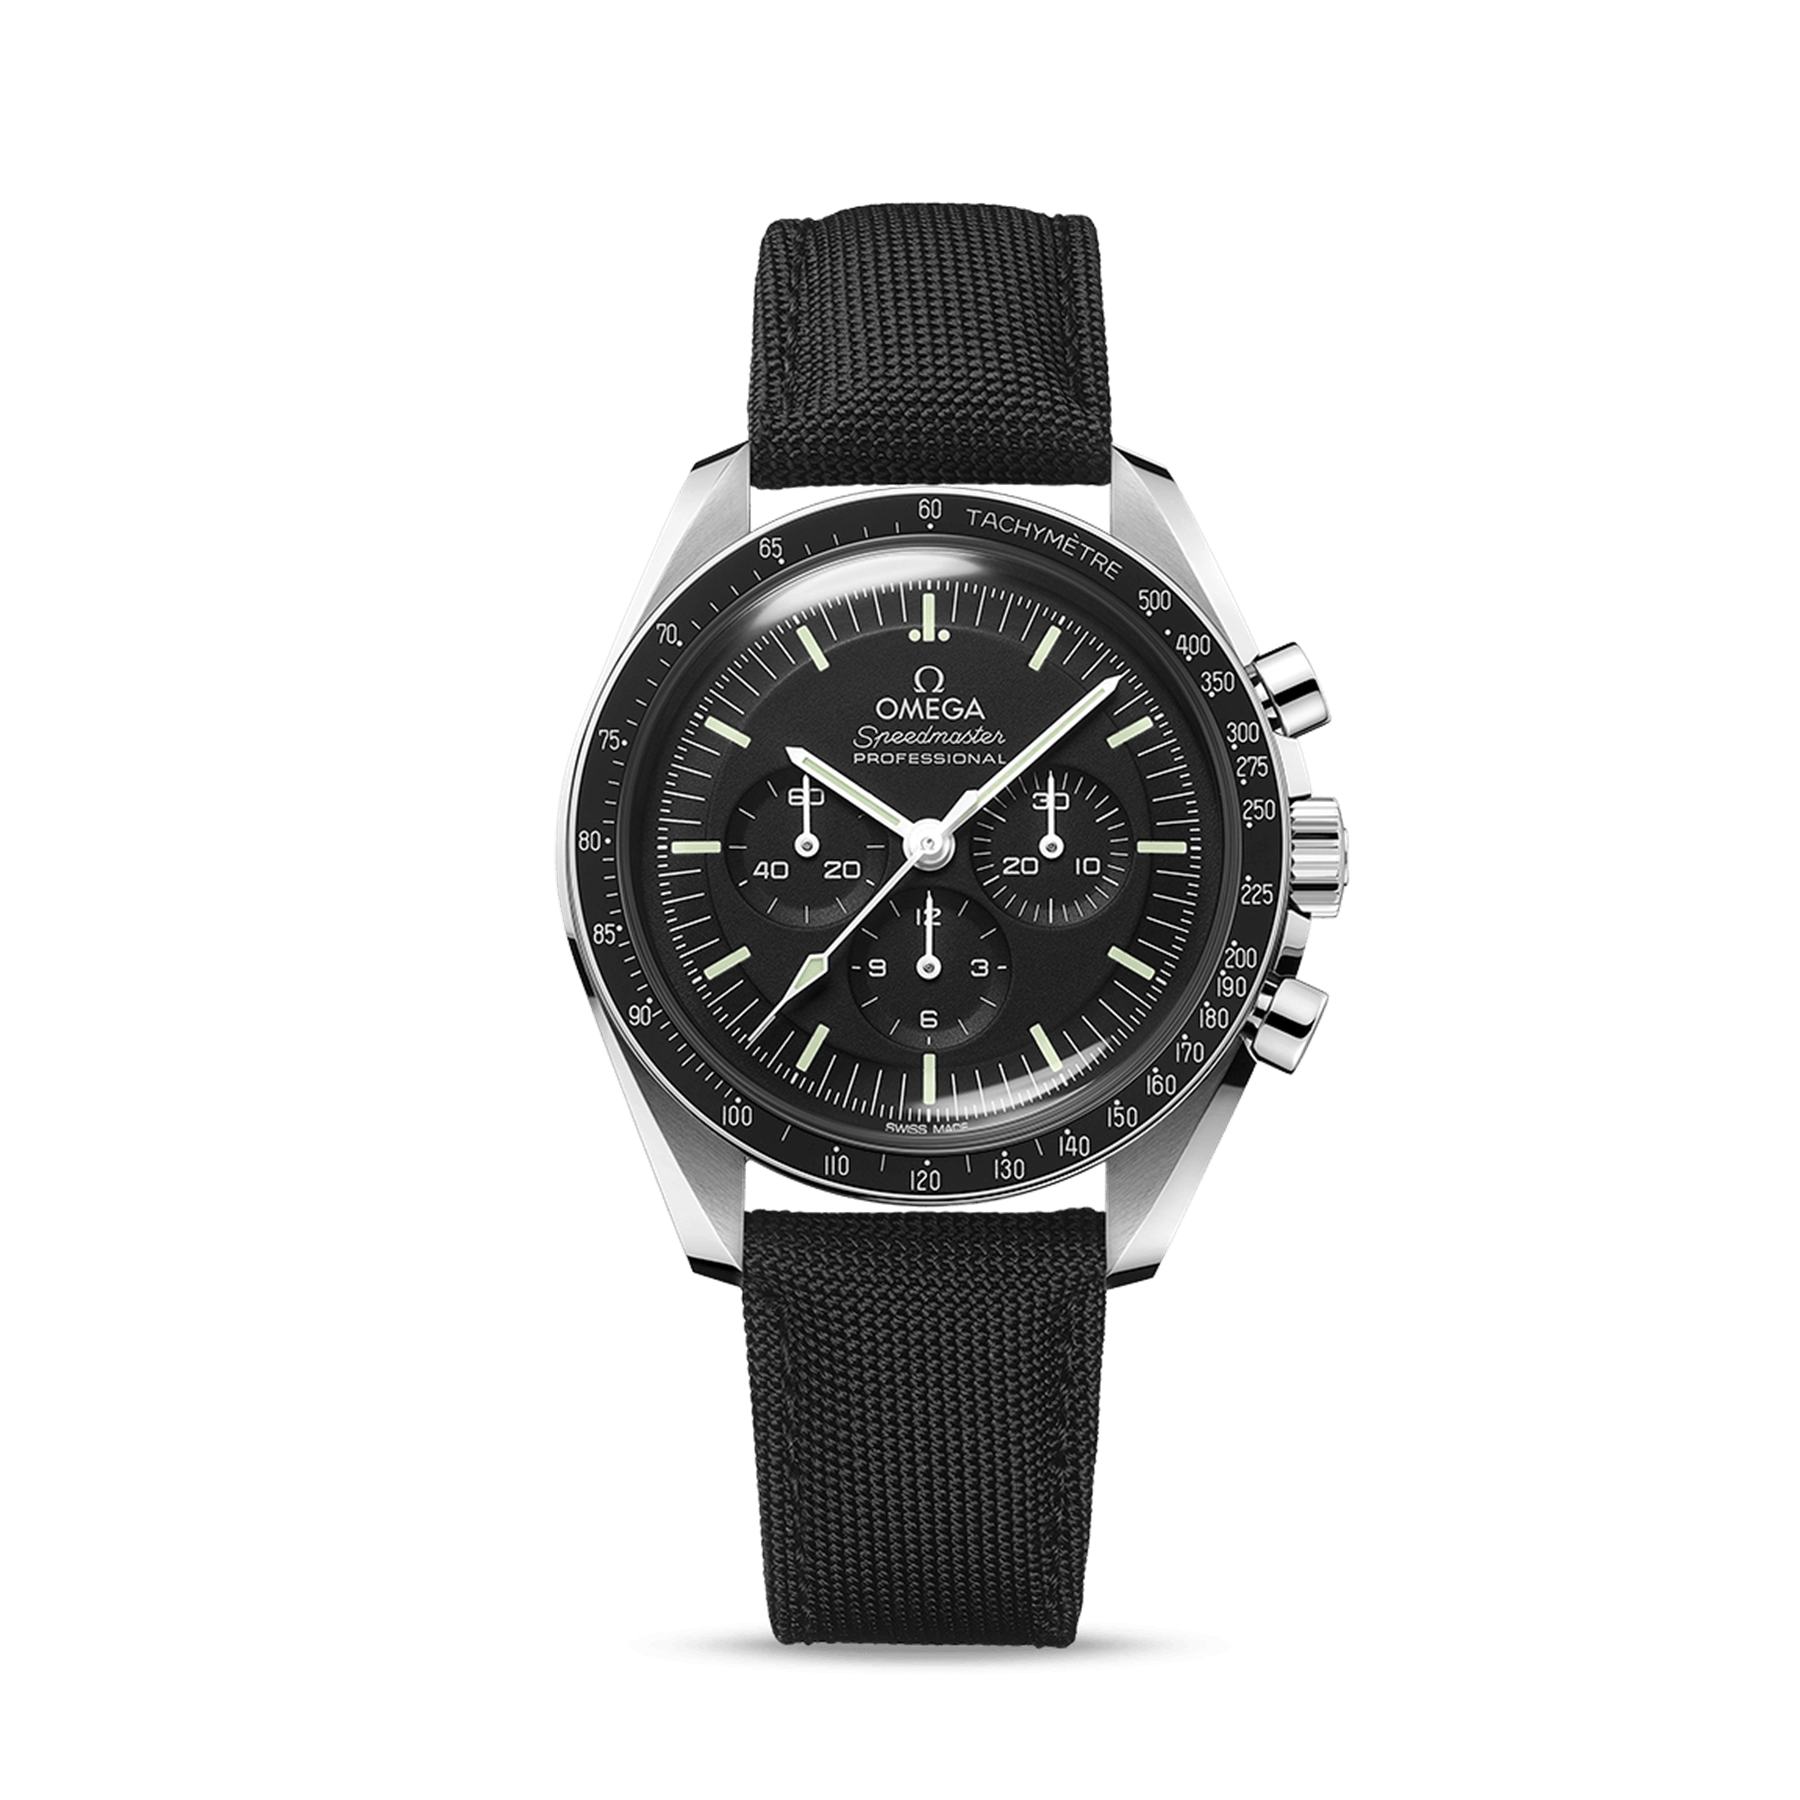 OMEGA Speedmaster Moonwatch Professional Co-Axial Master Chronometer Chronograph 42mm 310.32.42.31.01.001